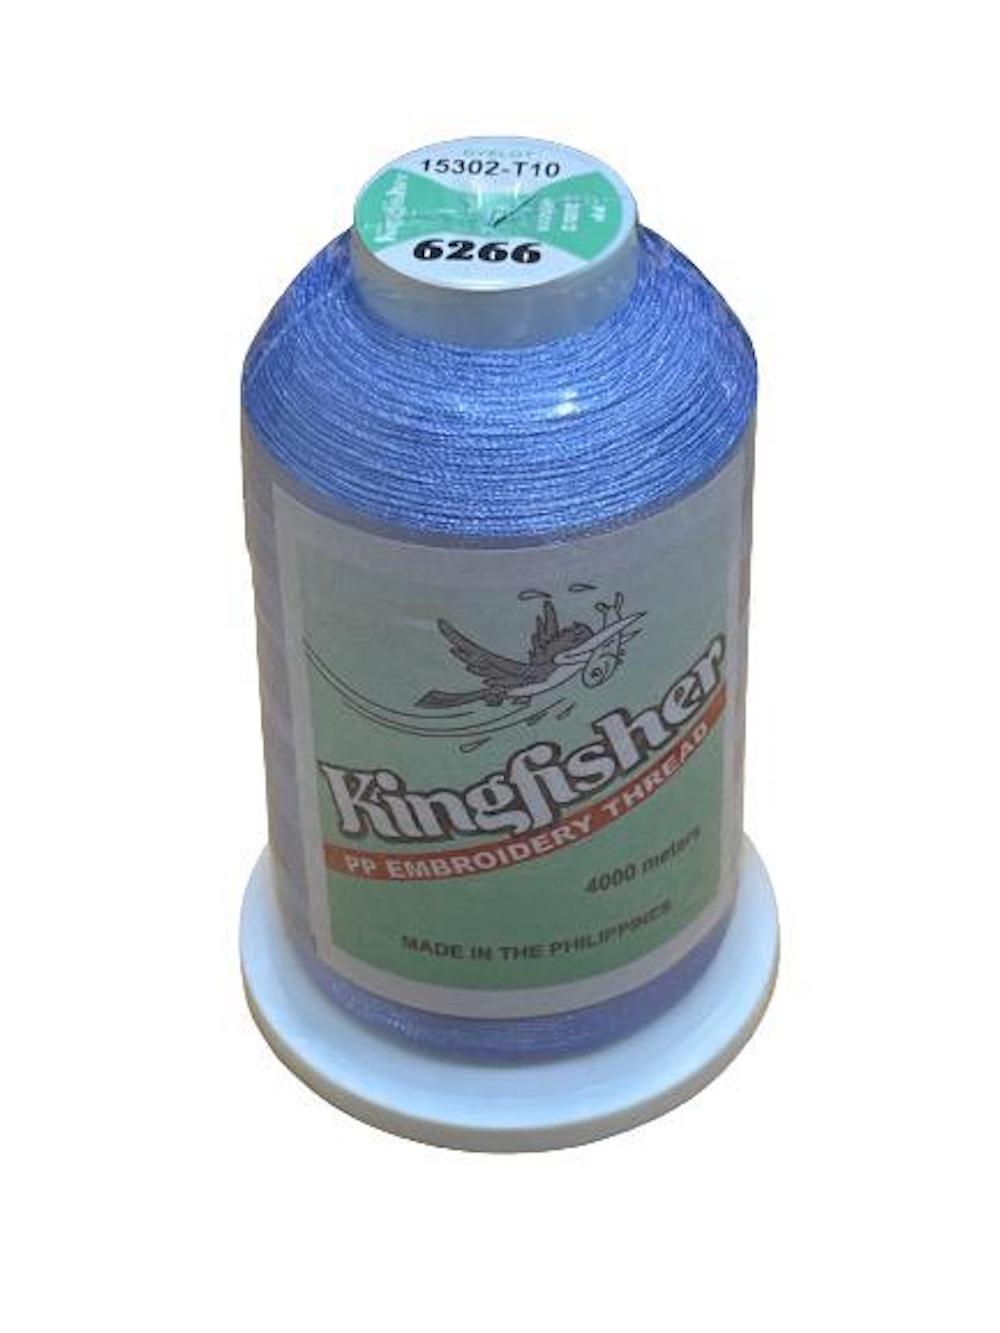 King Fisher Embroidery Thread 4000m 6266 - MY SEWING MALL